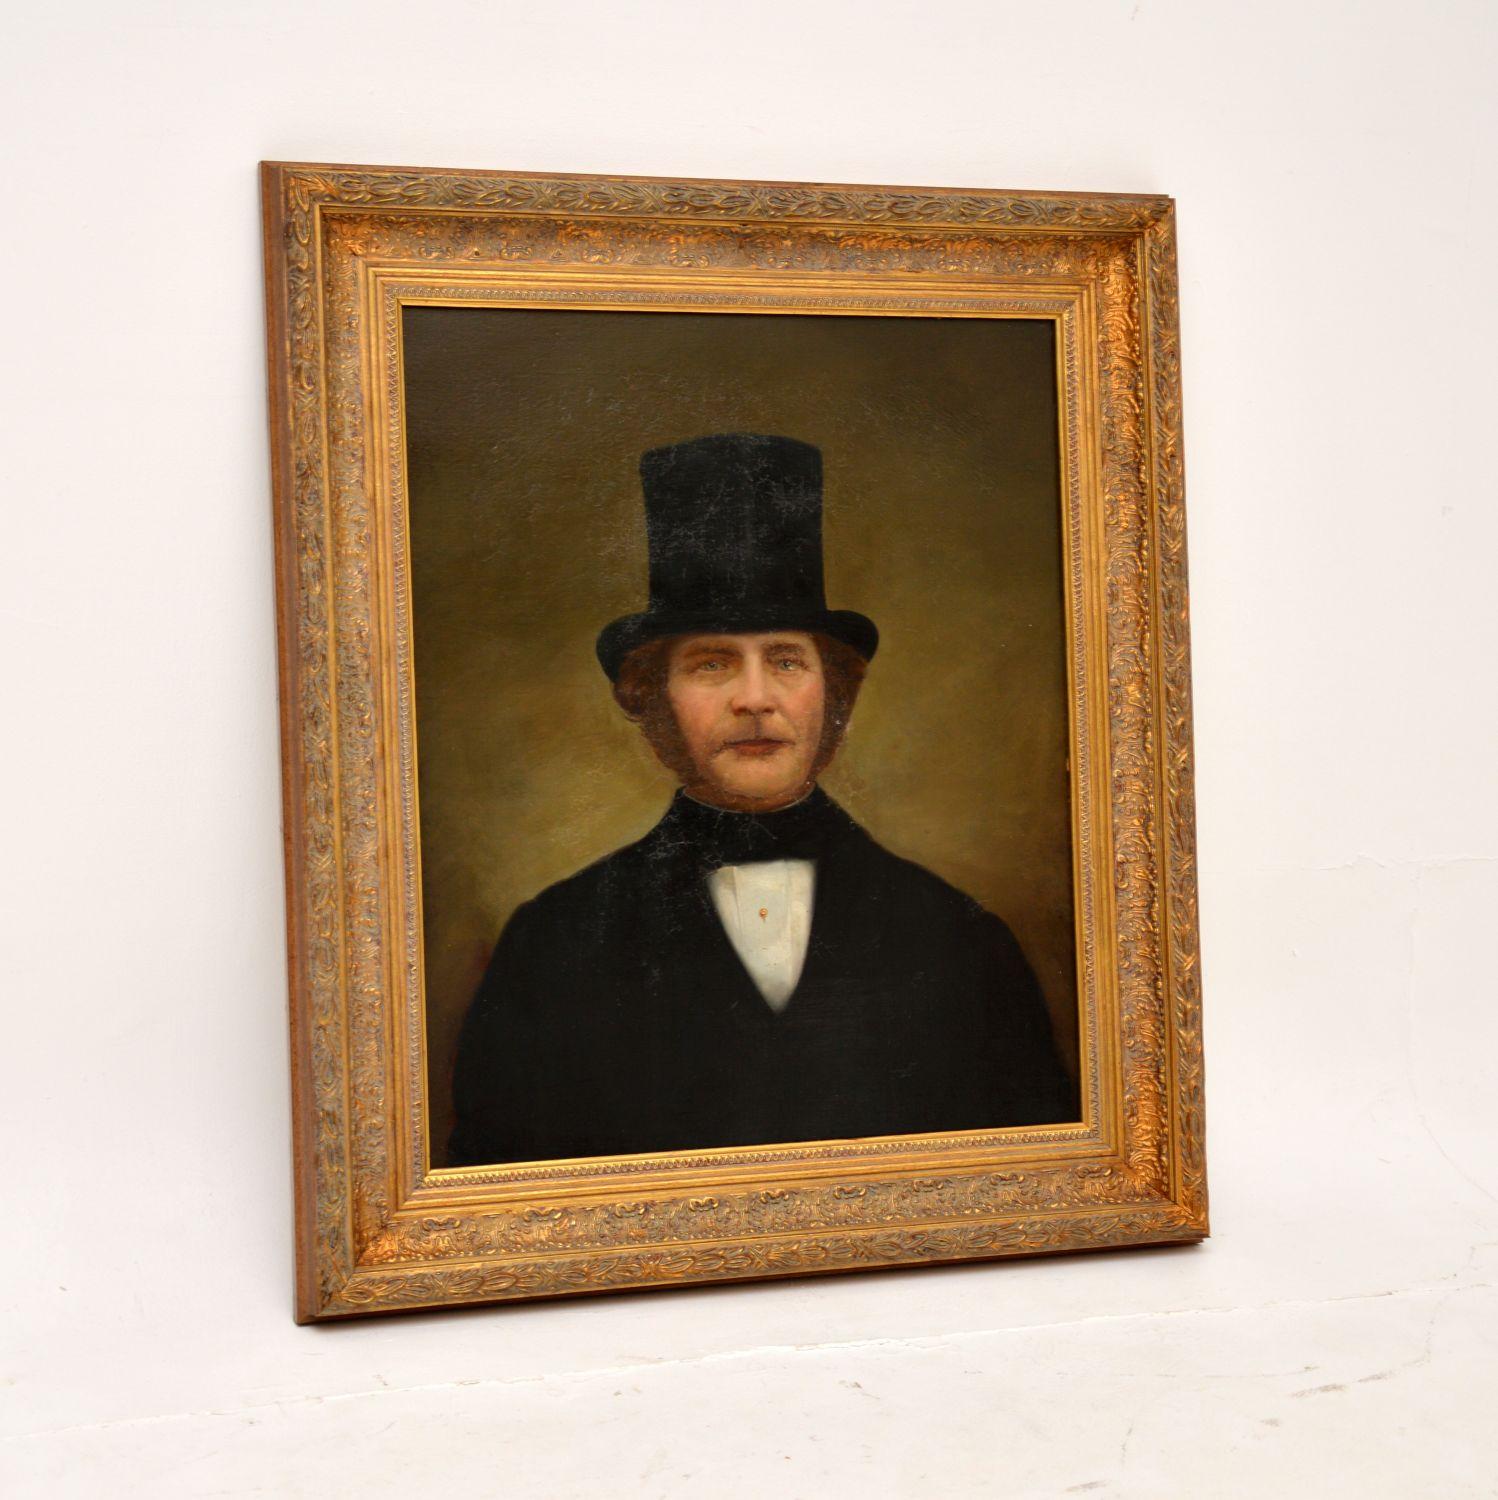 A wonderful antique Victorian portrait of a gentleman oil painting. This was painted in England, probably around 1860-1880.

The portrait is beautifully executed and is an impressive size.

The painting has some crazing and surface wear, seen in the